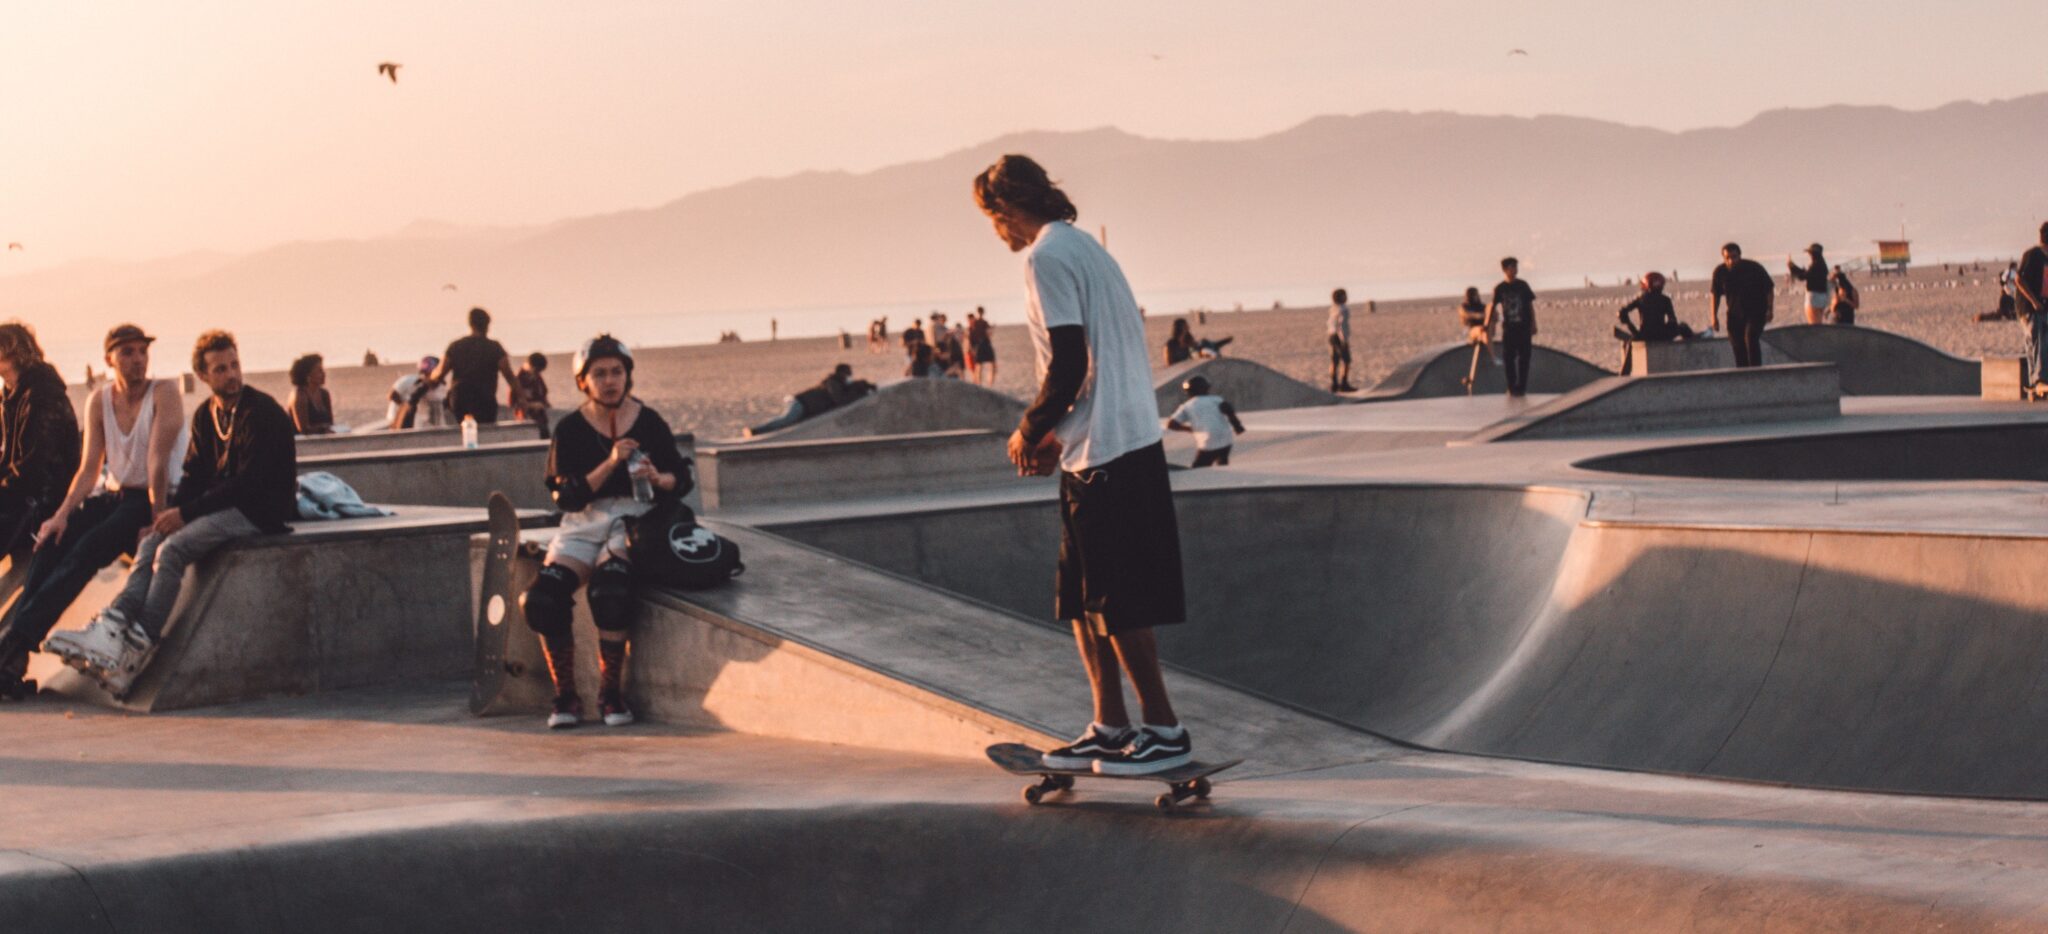 9 Reasons Why Skateboarding is the Best Hobby